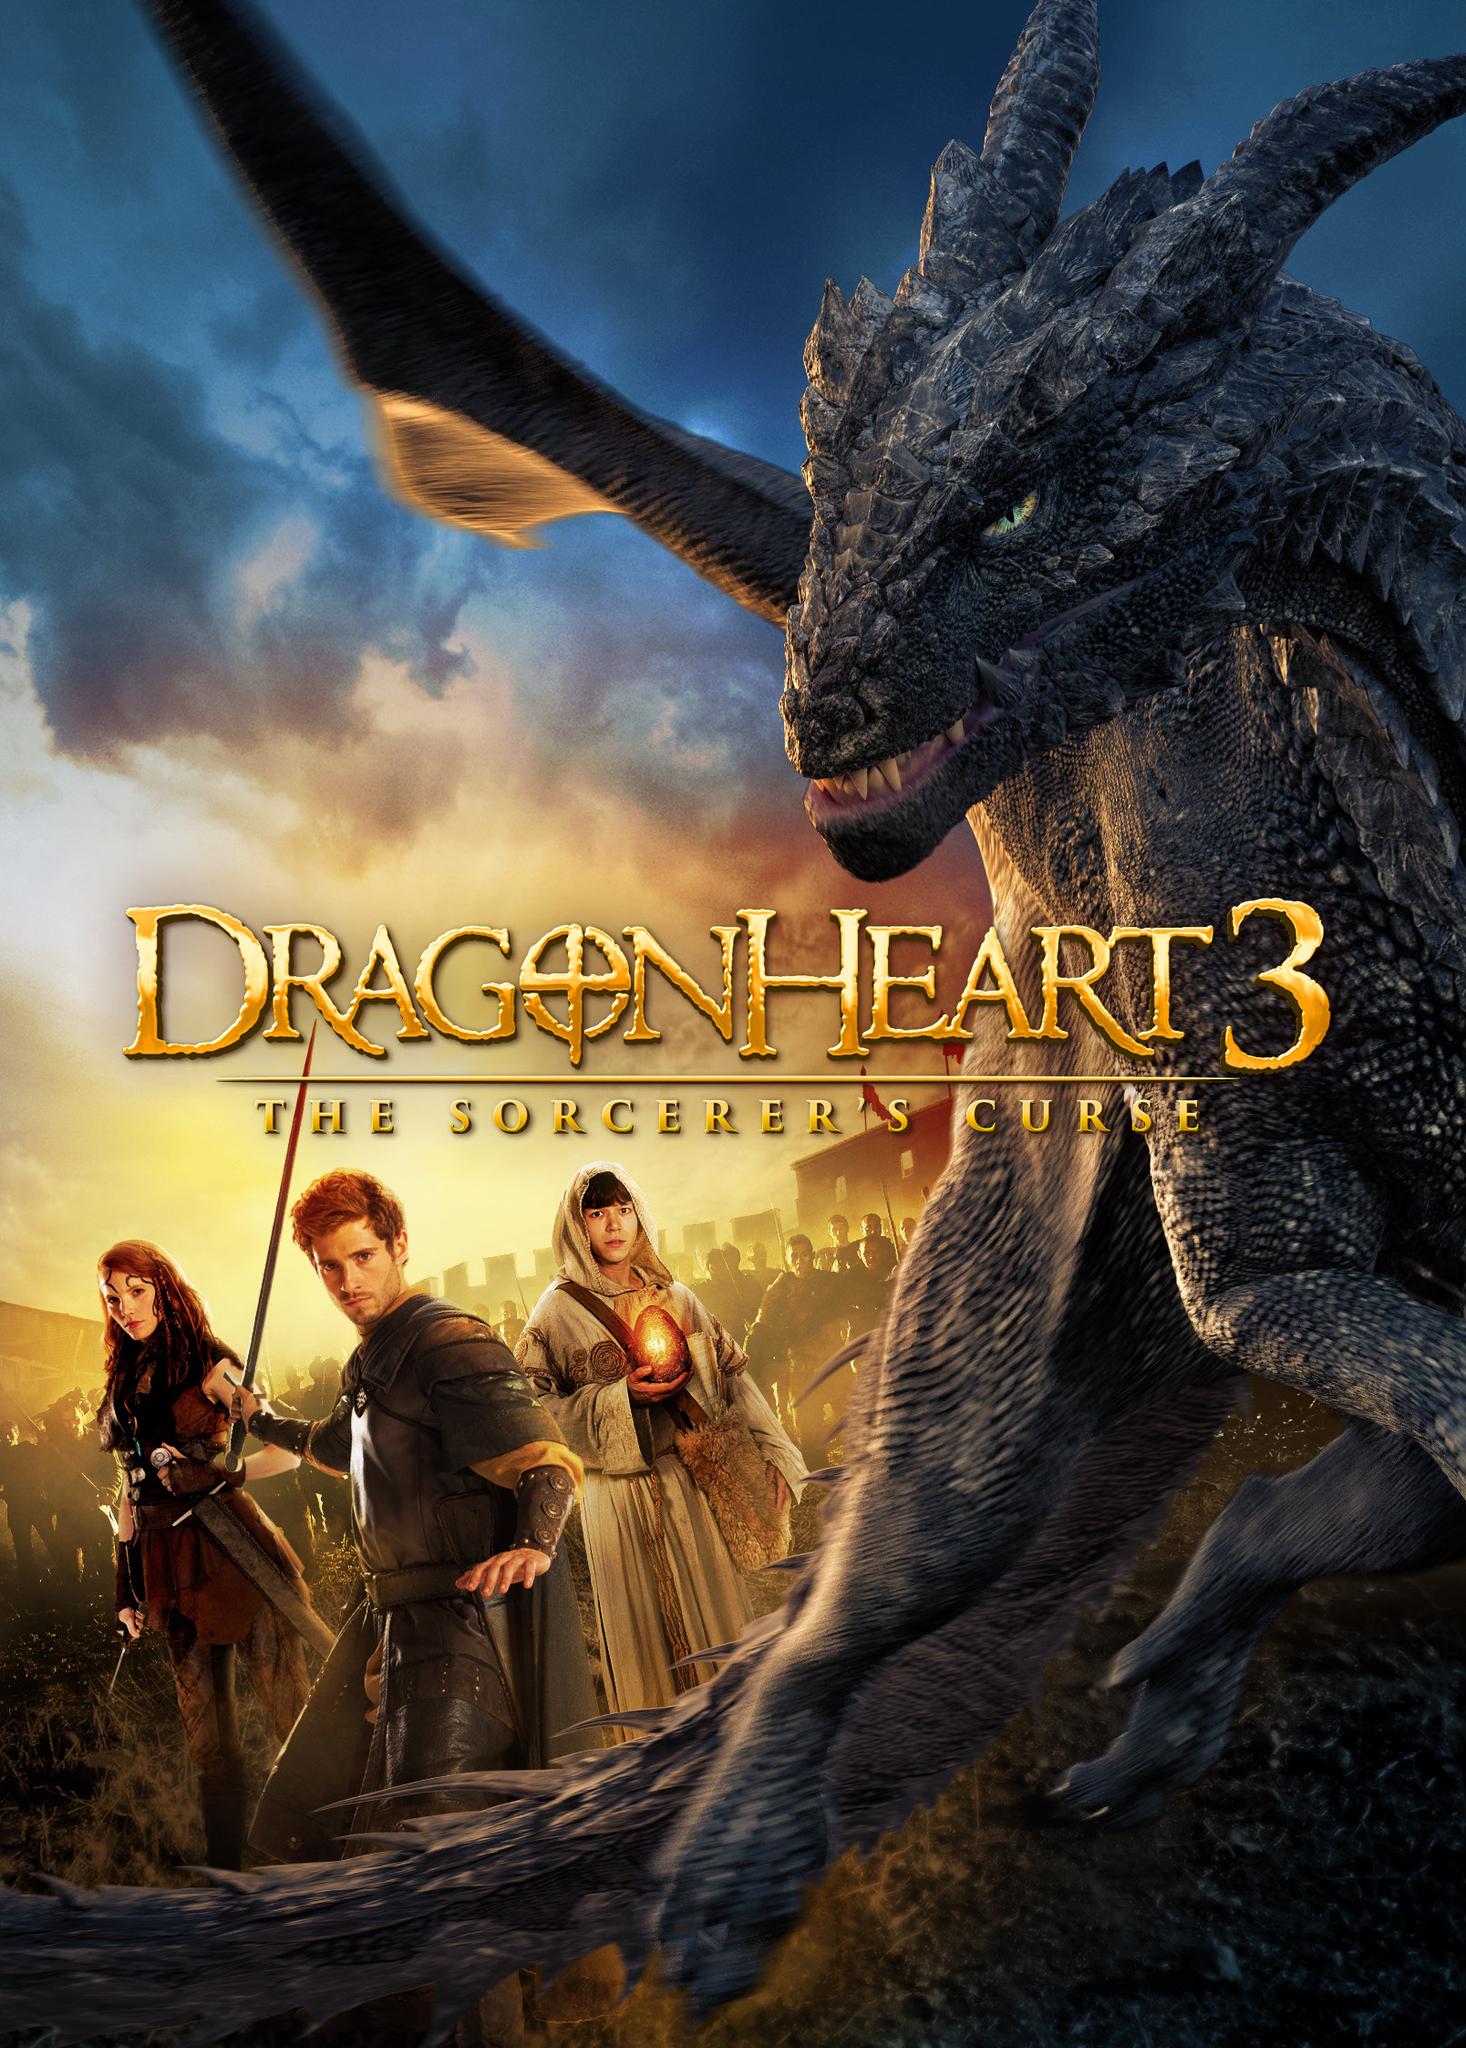 Dragonheart 3: The Sorcerer's Curse Movie Review